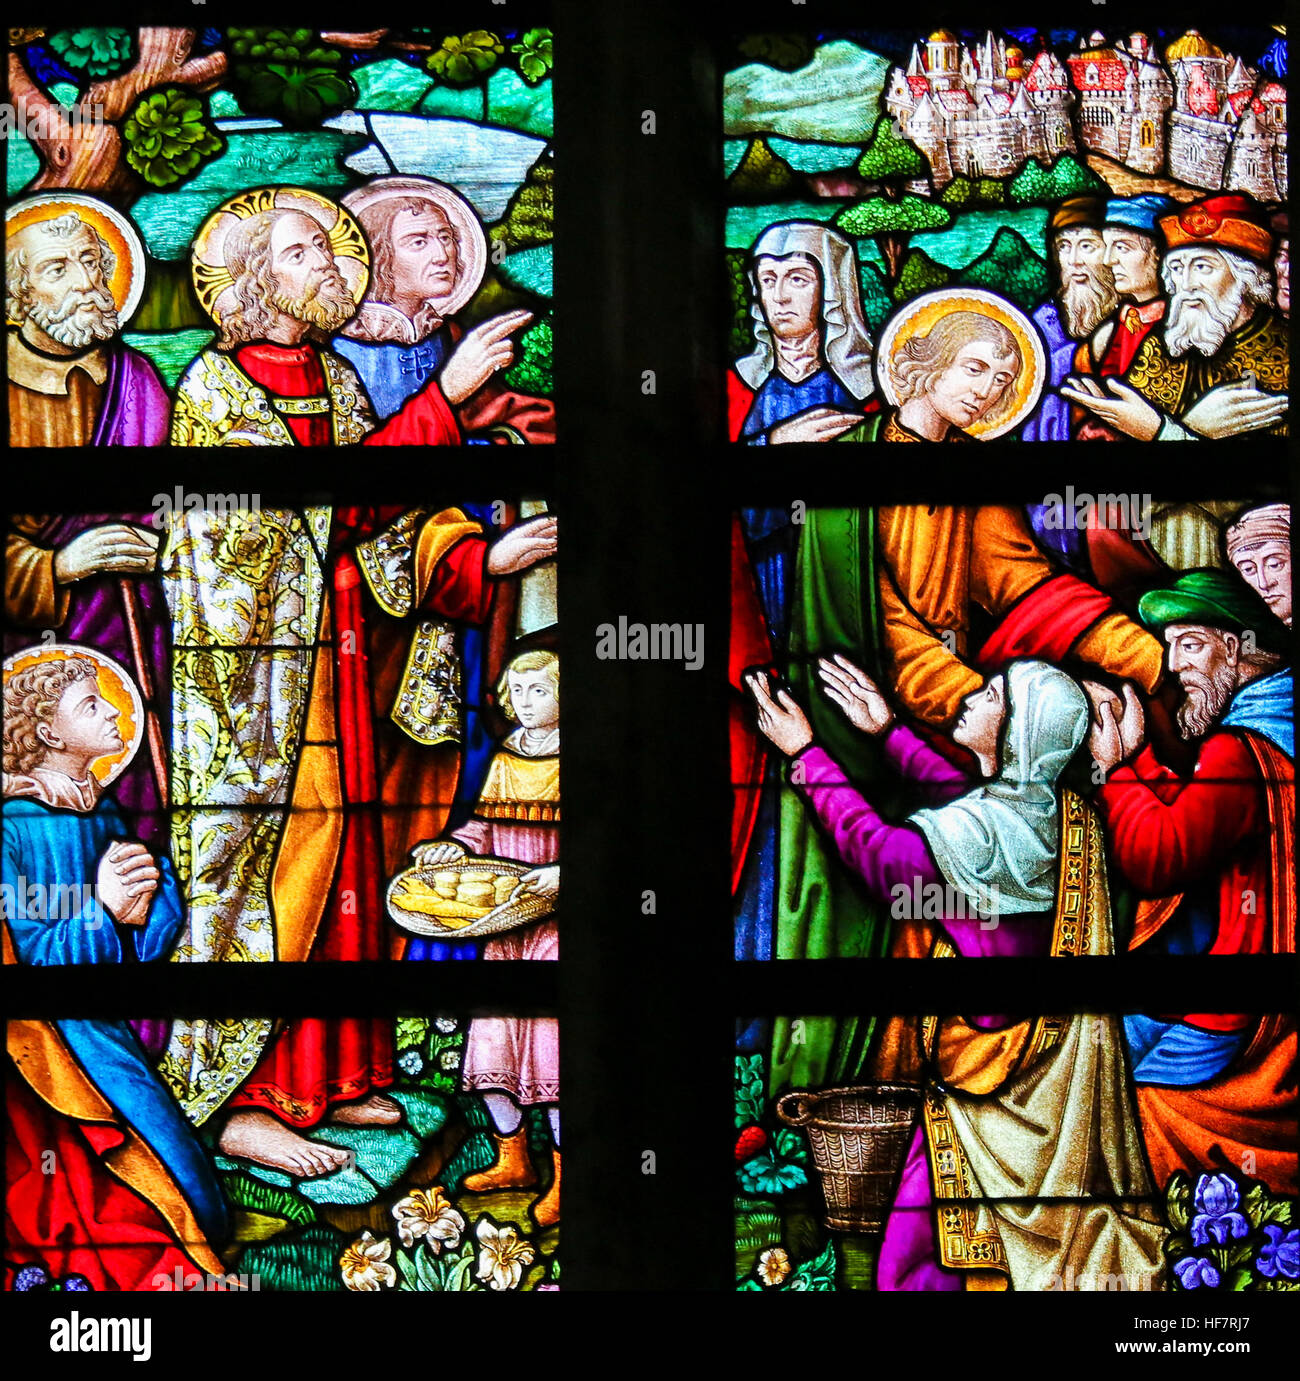 Stained Glass depicting Jesus Christ and the Miracle of the seven loaves and fishes, in the Cathedral of Saint Bavo in Ghent, Belgium. Stock Photo